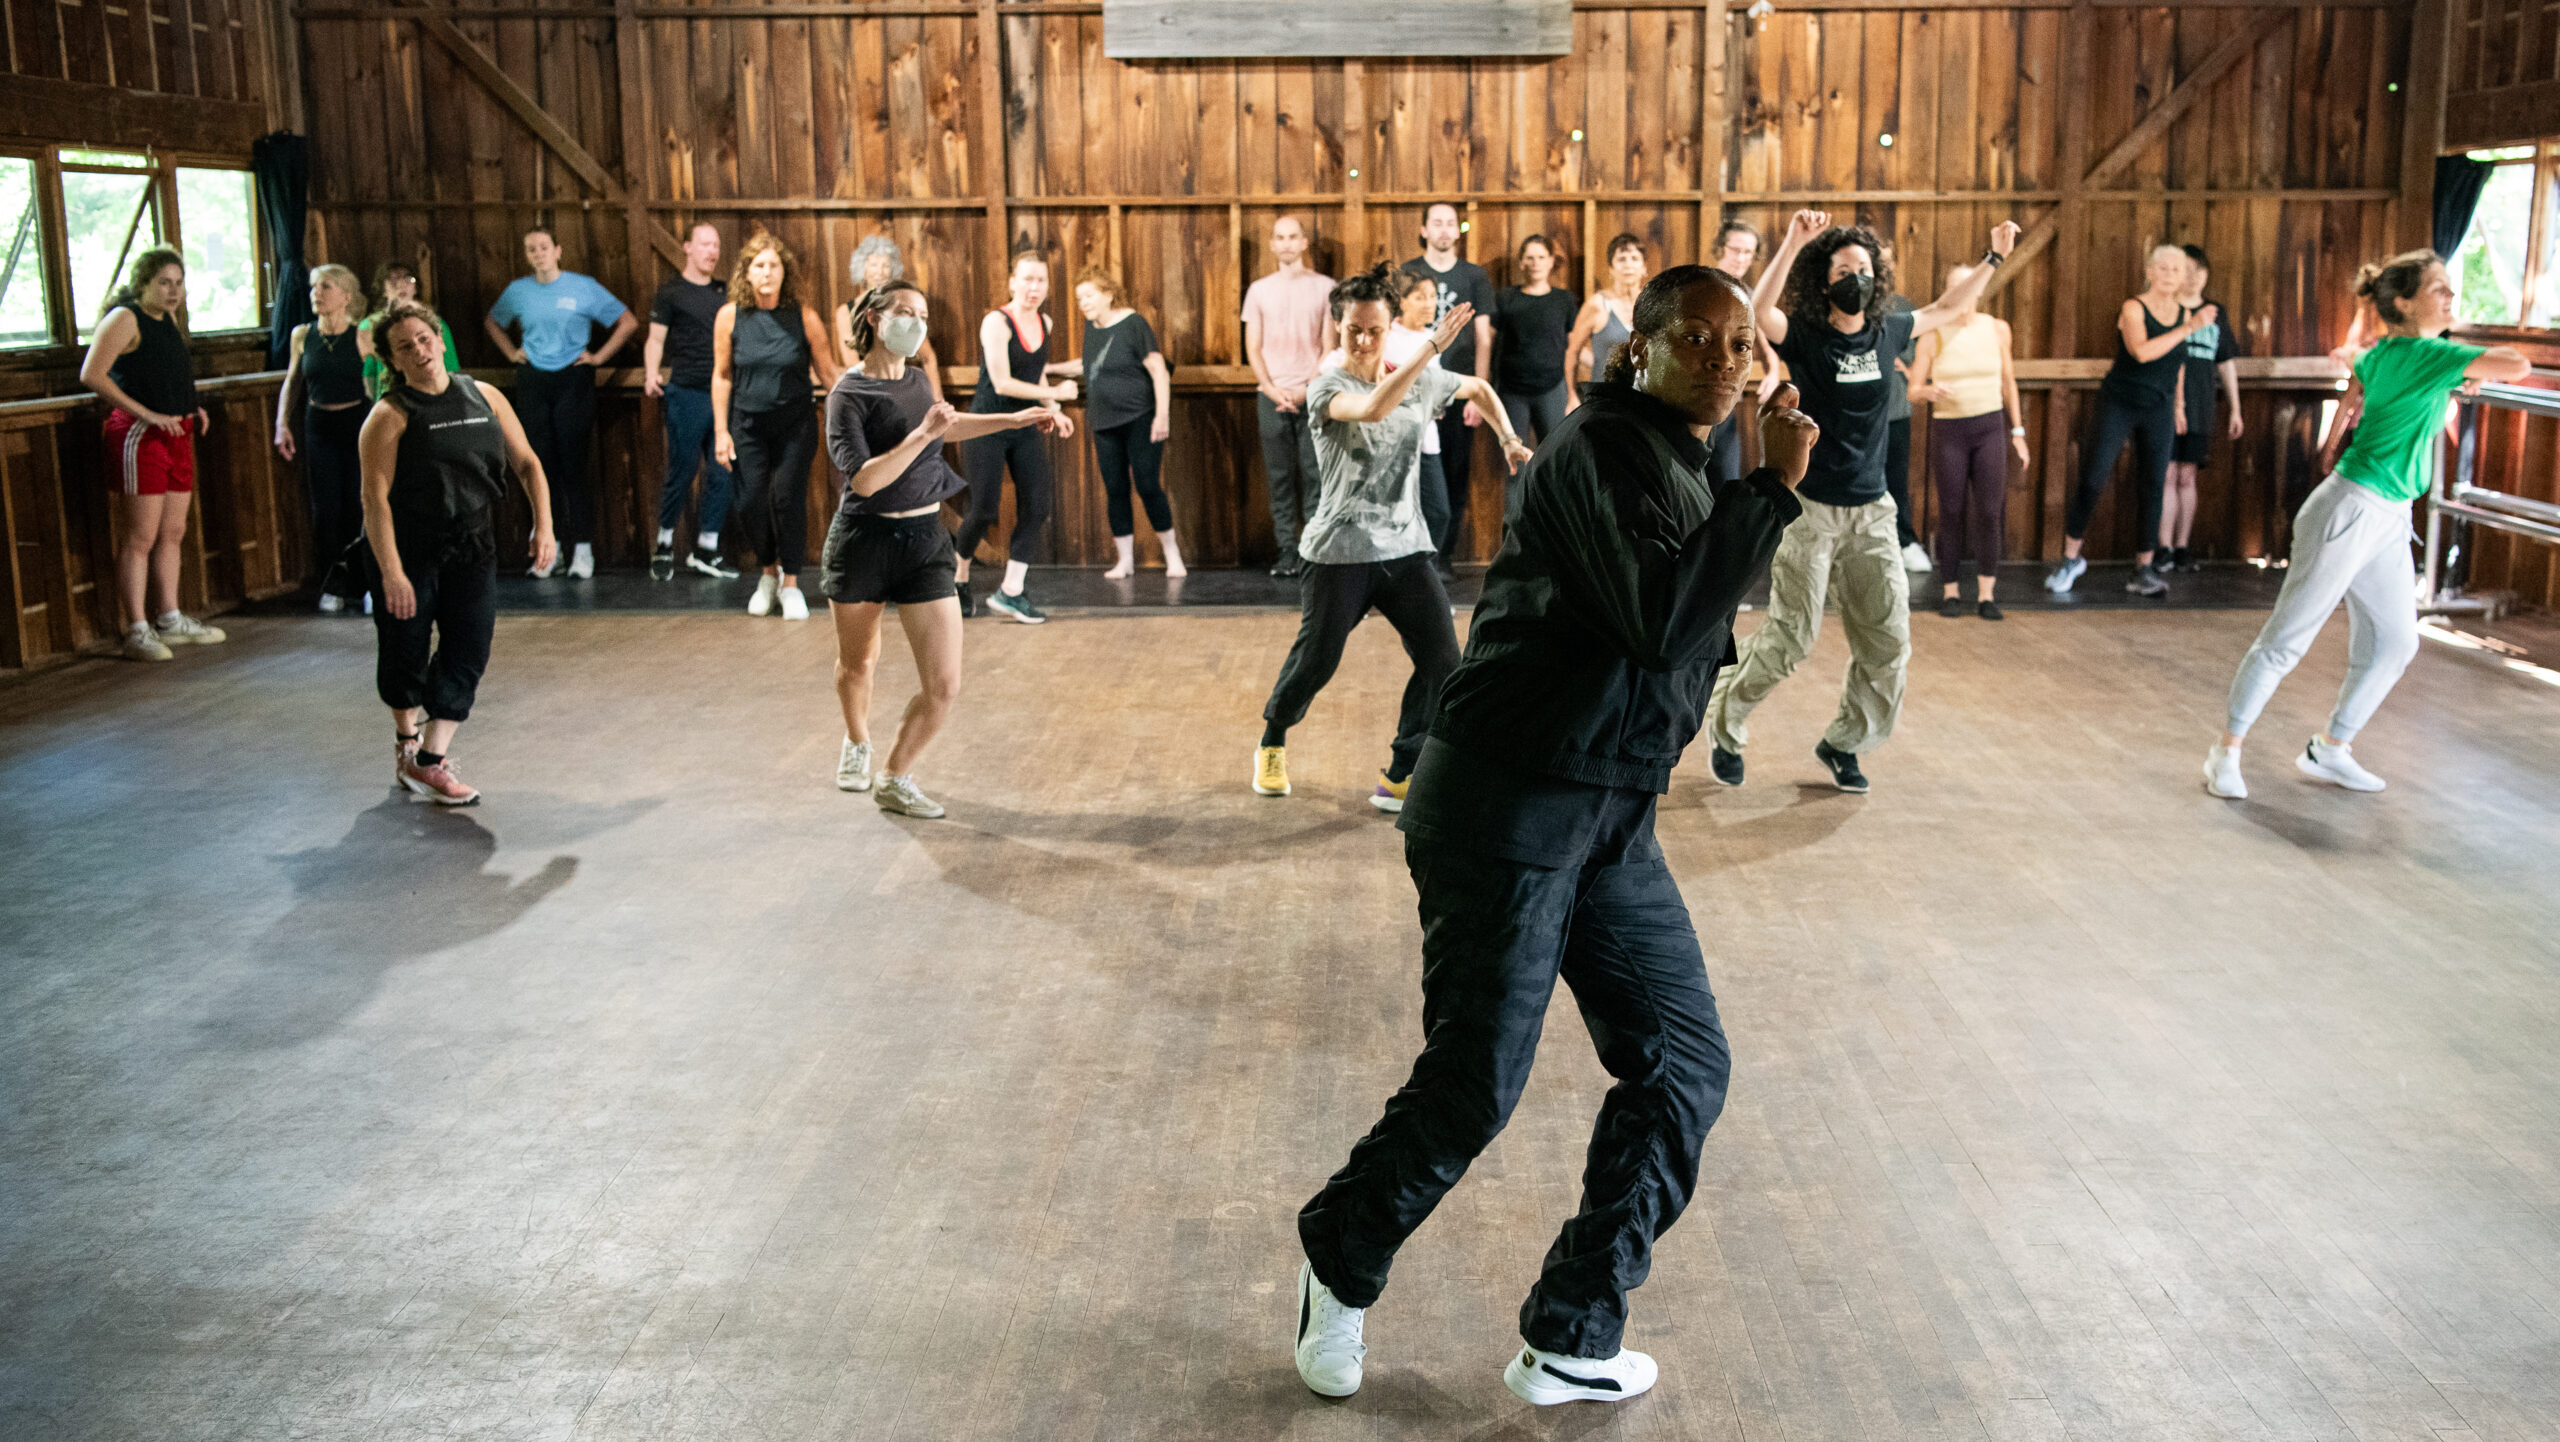 Inside a wooden studio, a teaching artist wearing all black demonstrates a dance move. Five students are in a line behind the teacher while mimicking the dance move, and the remaining students are leaning against the wall and watching.